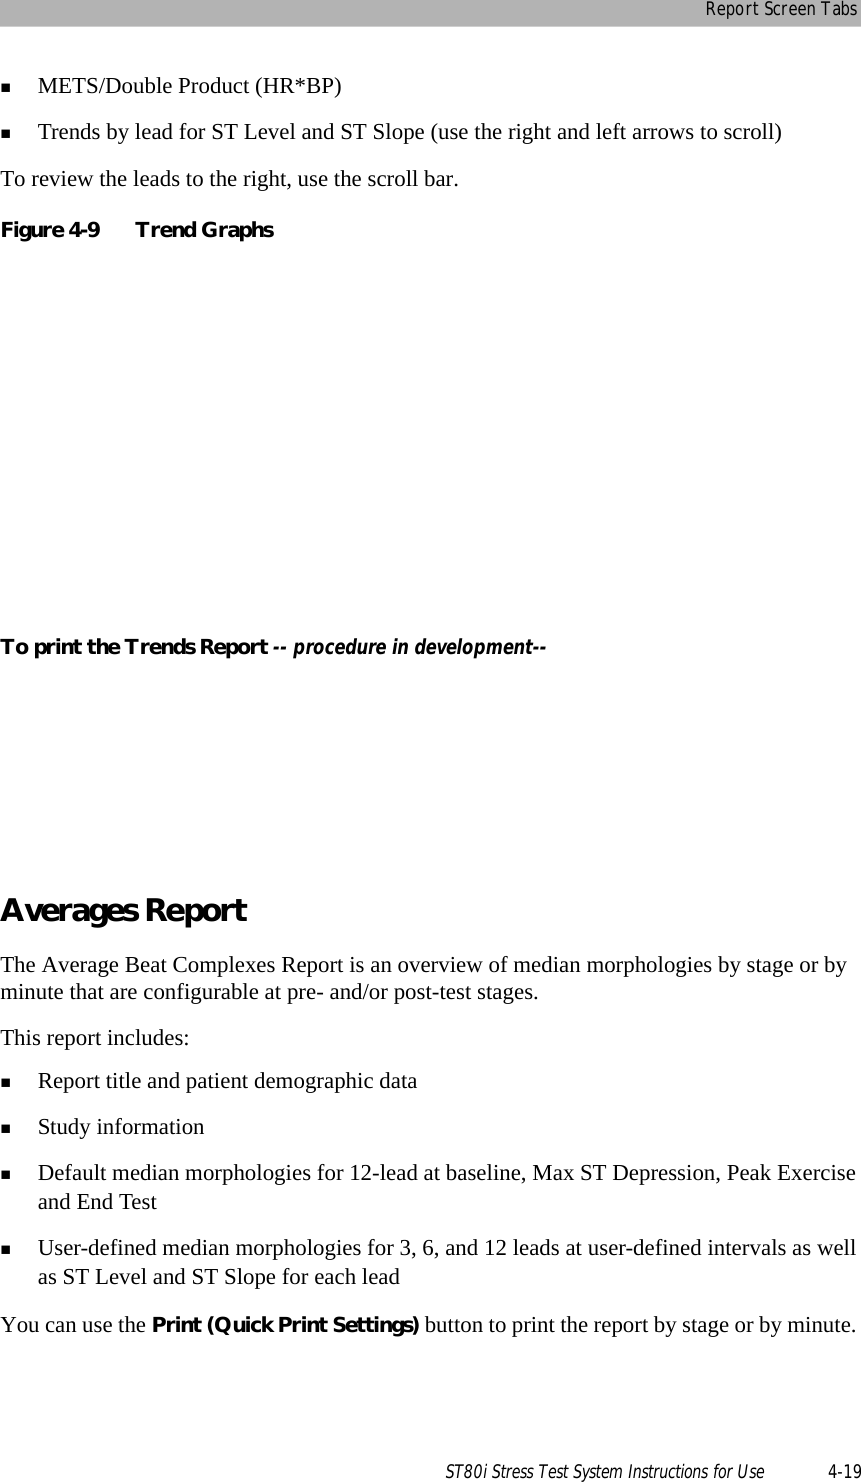 Report Screen TabsST80i Stress Test System Instructions for Use 4-19METS/Double Product (HR*BP)Trends by lead for ST Level and ST Slope (use the right and left arrows to scroll)To review the leads to the right, use the scroll bar. Figure 4-9 Trend GraphsTo print the Trends Report -- procedure in development--Averages ReportThe Average Beat Complexes Report is an overview of median morphologies by stage or by minute that are configurable at pre- and/or post-test stages. This report includes:Report title and patient demographic dataStudy information Default median morphologies for 12-lead at baseline, Max ST Depression, Peak Exercise and End TestUser-defined median morphologies for 3, 6, and 12 leads at user-defined intervals as well as ST Level and ST Slope for each leadYou can use the Print (Quick Print Settings) button to print the report by stage or by minute. 